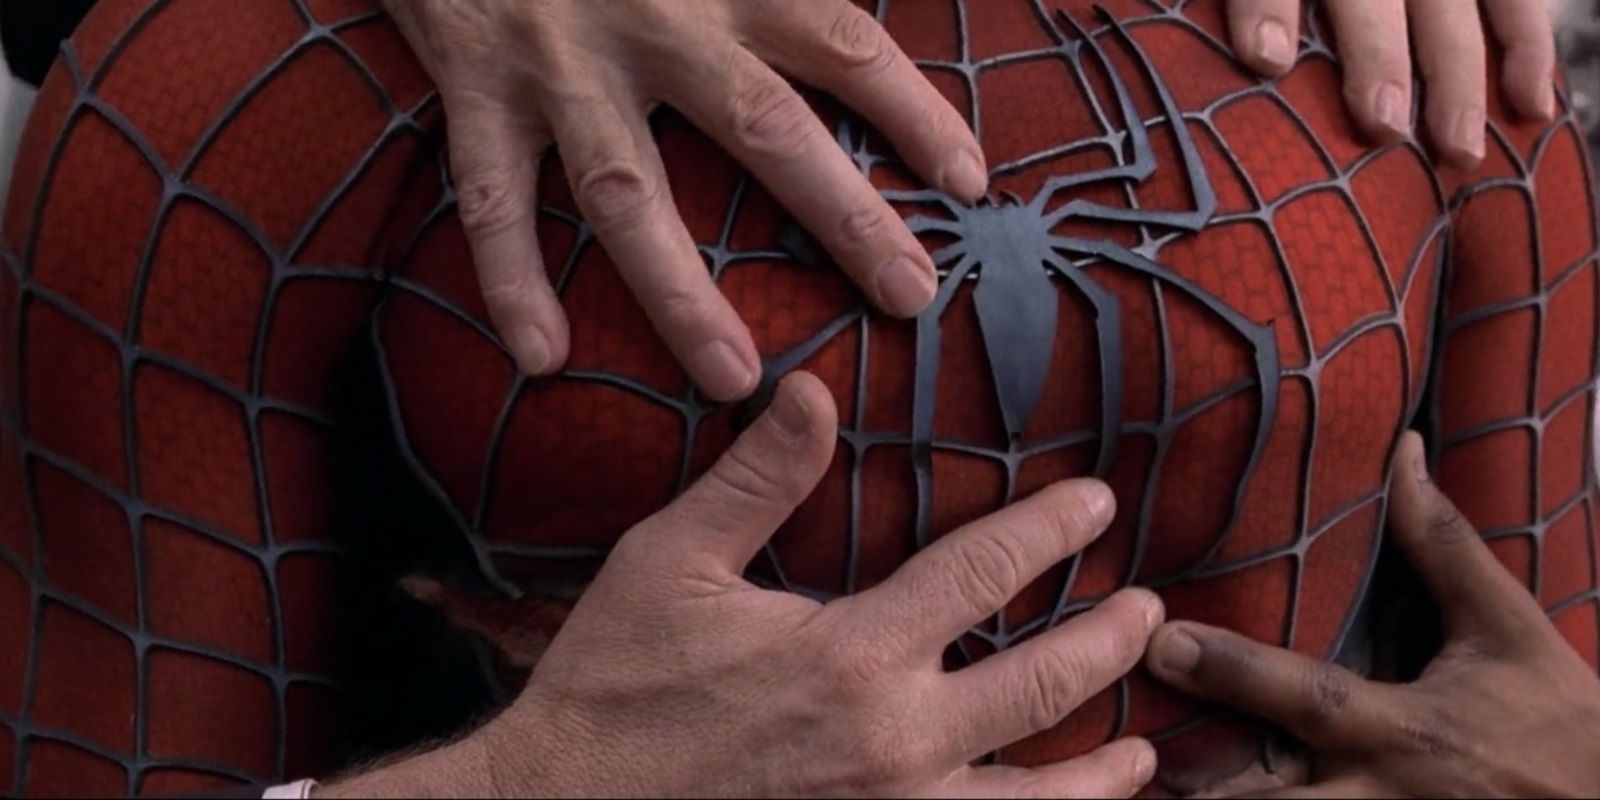 'If We Were to Make [It]...':Sam Raimi Addresses Challenges for Spider-Man 4